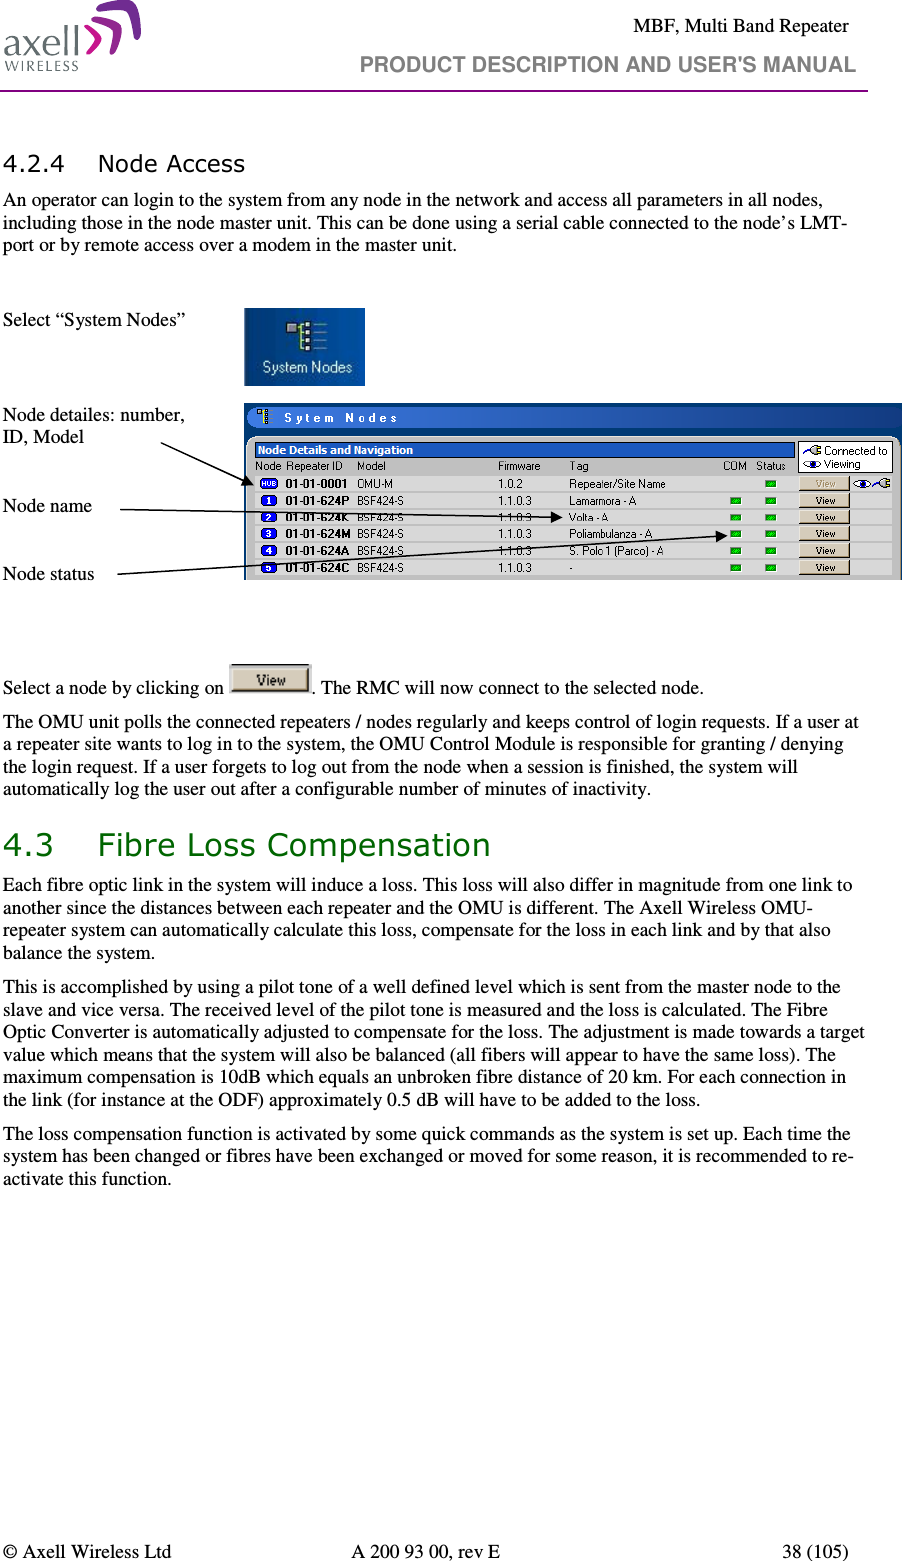     MBF, Multi Band Repeater                                     PRODUCT DESCRIPTION AND USER&apos;S MANUAL   © Axell Wireless Ltd  A 200 93 00, rev E  38 (105)  4.2.4 Node Access An operator can login to the system from any node in the network and access all parameters in all nodes, including those in the node master unit. This can be done using a serial cable connected to the node’s LMT-port or by remote access over a modem in the master unit.   Select “System Nodes”     Node detailes: number, ID, Model  Node name  Node status     Select a node by clicking on  . The RMC will now connect to the selected node. The OMU unit polls the connected repeaters / nodes regularly and keeps control of login requests. If a user at a repeater site wants to log in to the system, the OMU Control Module is responsible for granting / denying the login request. If a user forgets to log out from the node when a session is finished, the system will automatically log the user out after a configurable number of minutes of inactivity.   4.3 Fibre Loss Compensation Each fibre optic link in the system will induce a loss. This loss will also differ in magnitude from one link to another since the distances between each repeater and the OMU is different. The Axell Wireless OMU-repeater system can automatically calculate this loss, compensate for the loss in each link and by that also balance the system. This is accomplished by using a pilot tone of a well defined level which is sent from the master node to the slave and vice versa. The received level of the pilot tone is measured and the loss is calculated. The Fibre Optic Converter is automatically adjusted to compensate for the loss. The adjustment is made towards a target value which means that the system will also be balanced (all fibers will appear to have the same loss). The maximum compensation is 10dB which equals an unbroken fibre distance of 20 km. For each connection in the link (for instance at the ODF) approximately 0.5 dB will have to be added to the loss. The loss compensation function is activated by some quick commands as the system is set up. Each time the system has been changed or fibres have been exchanged or moved for some reason, it is recommended to re-activate this function.   